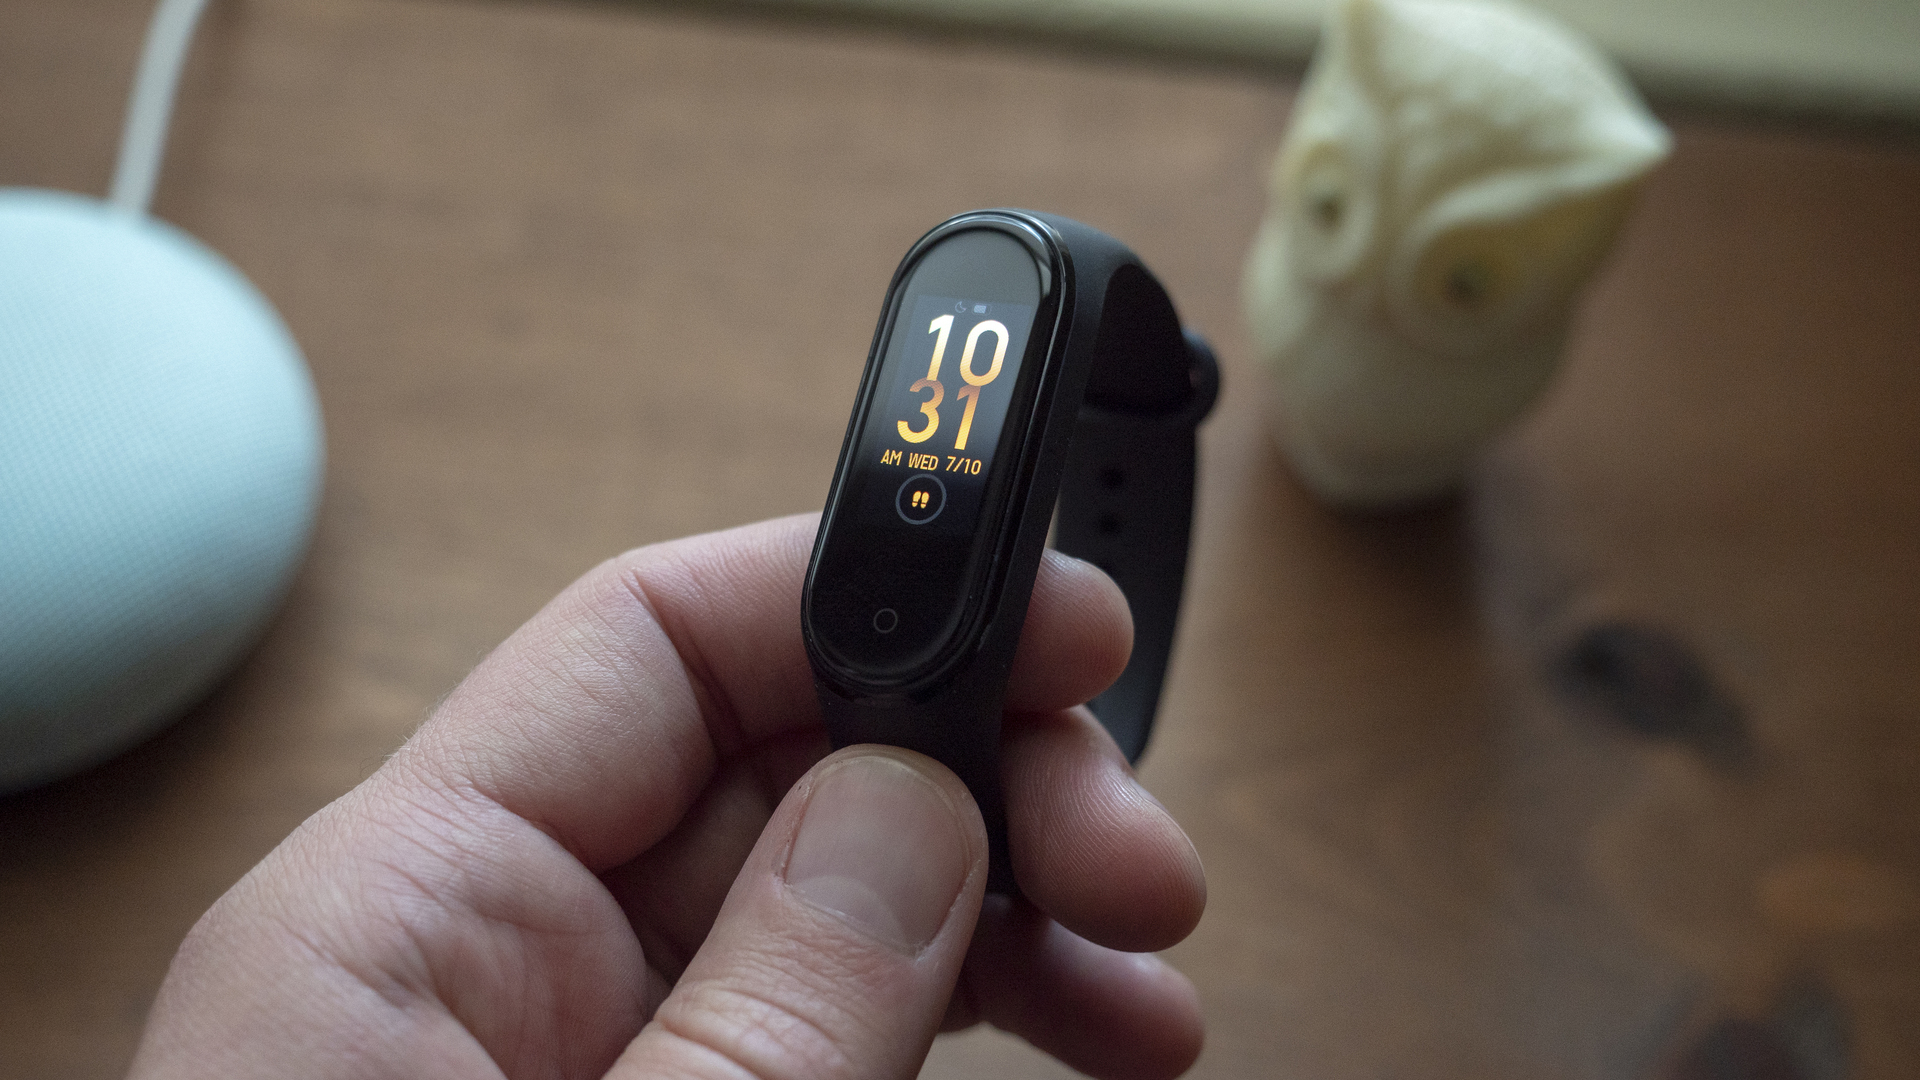 Xiaomi Mi Band 5 rumored to have a larger display, global NFC support